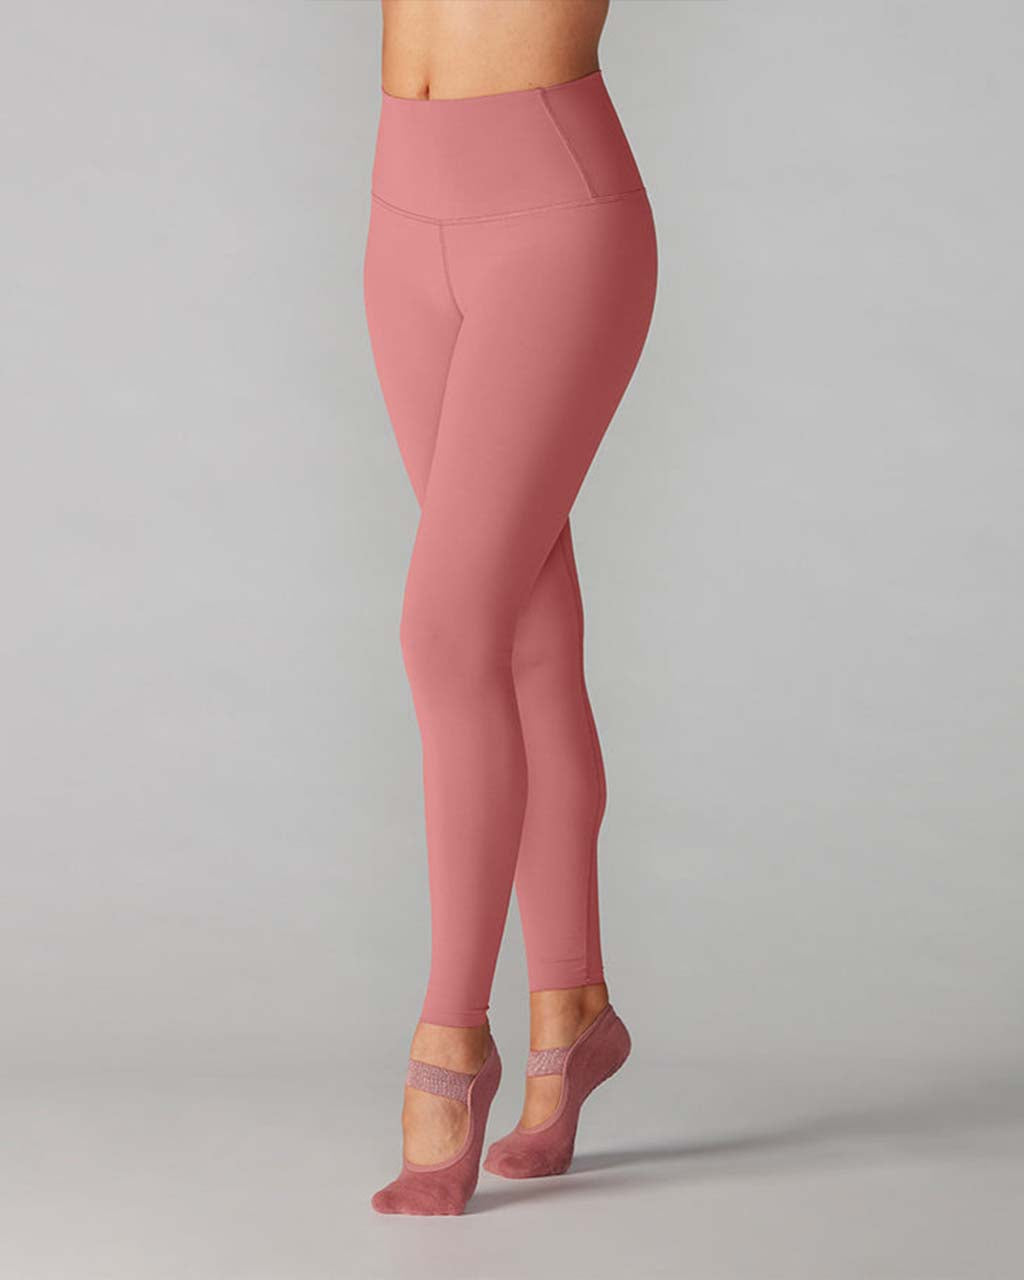 Peach Pink Color Women's Tights, Women's 7/8 Leggings With 2 Side